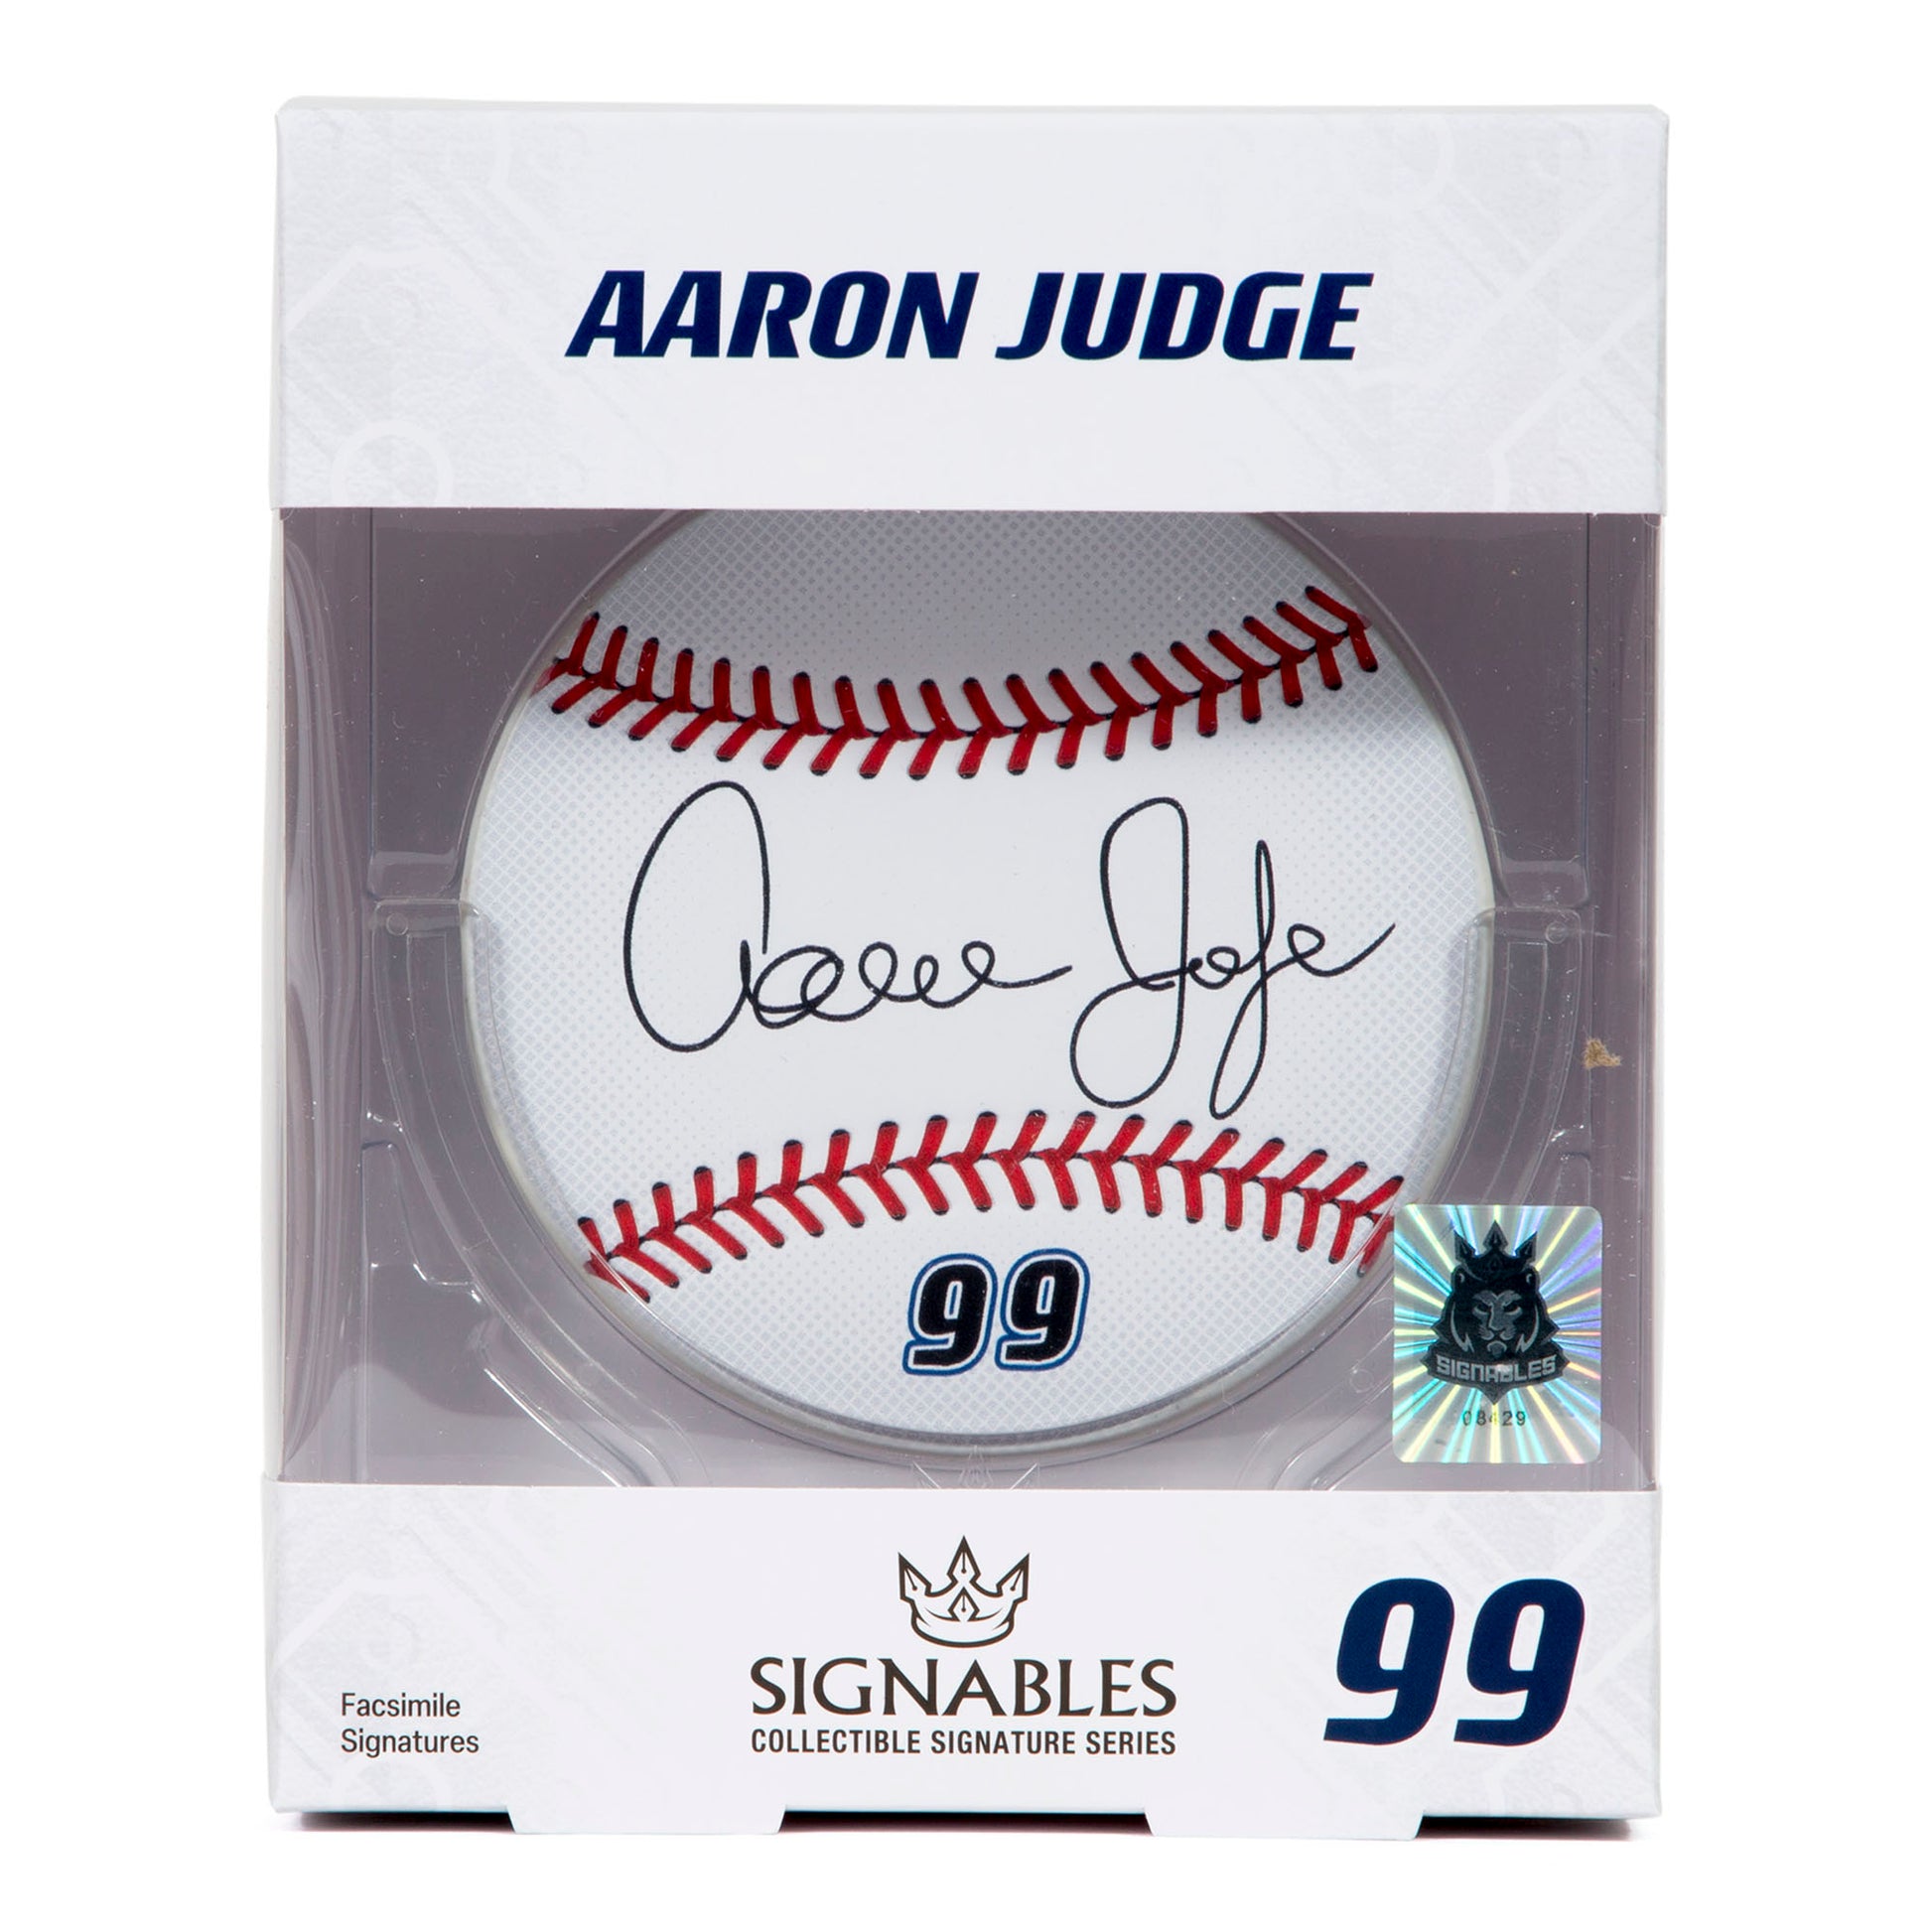 BAJ (Aaron Judge) New York Yankees - Officially Licensed MLB Print -  Limited Release